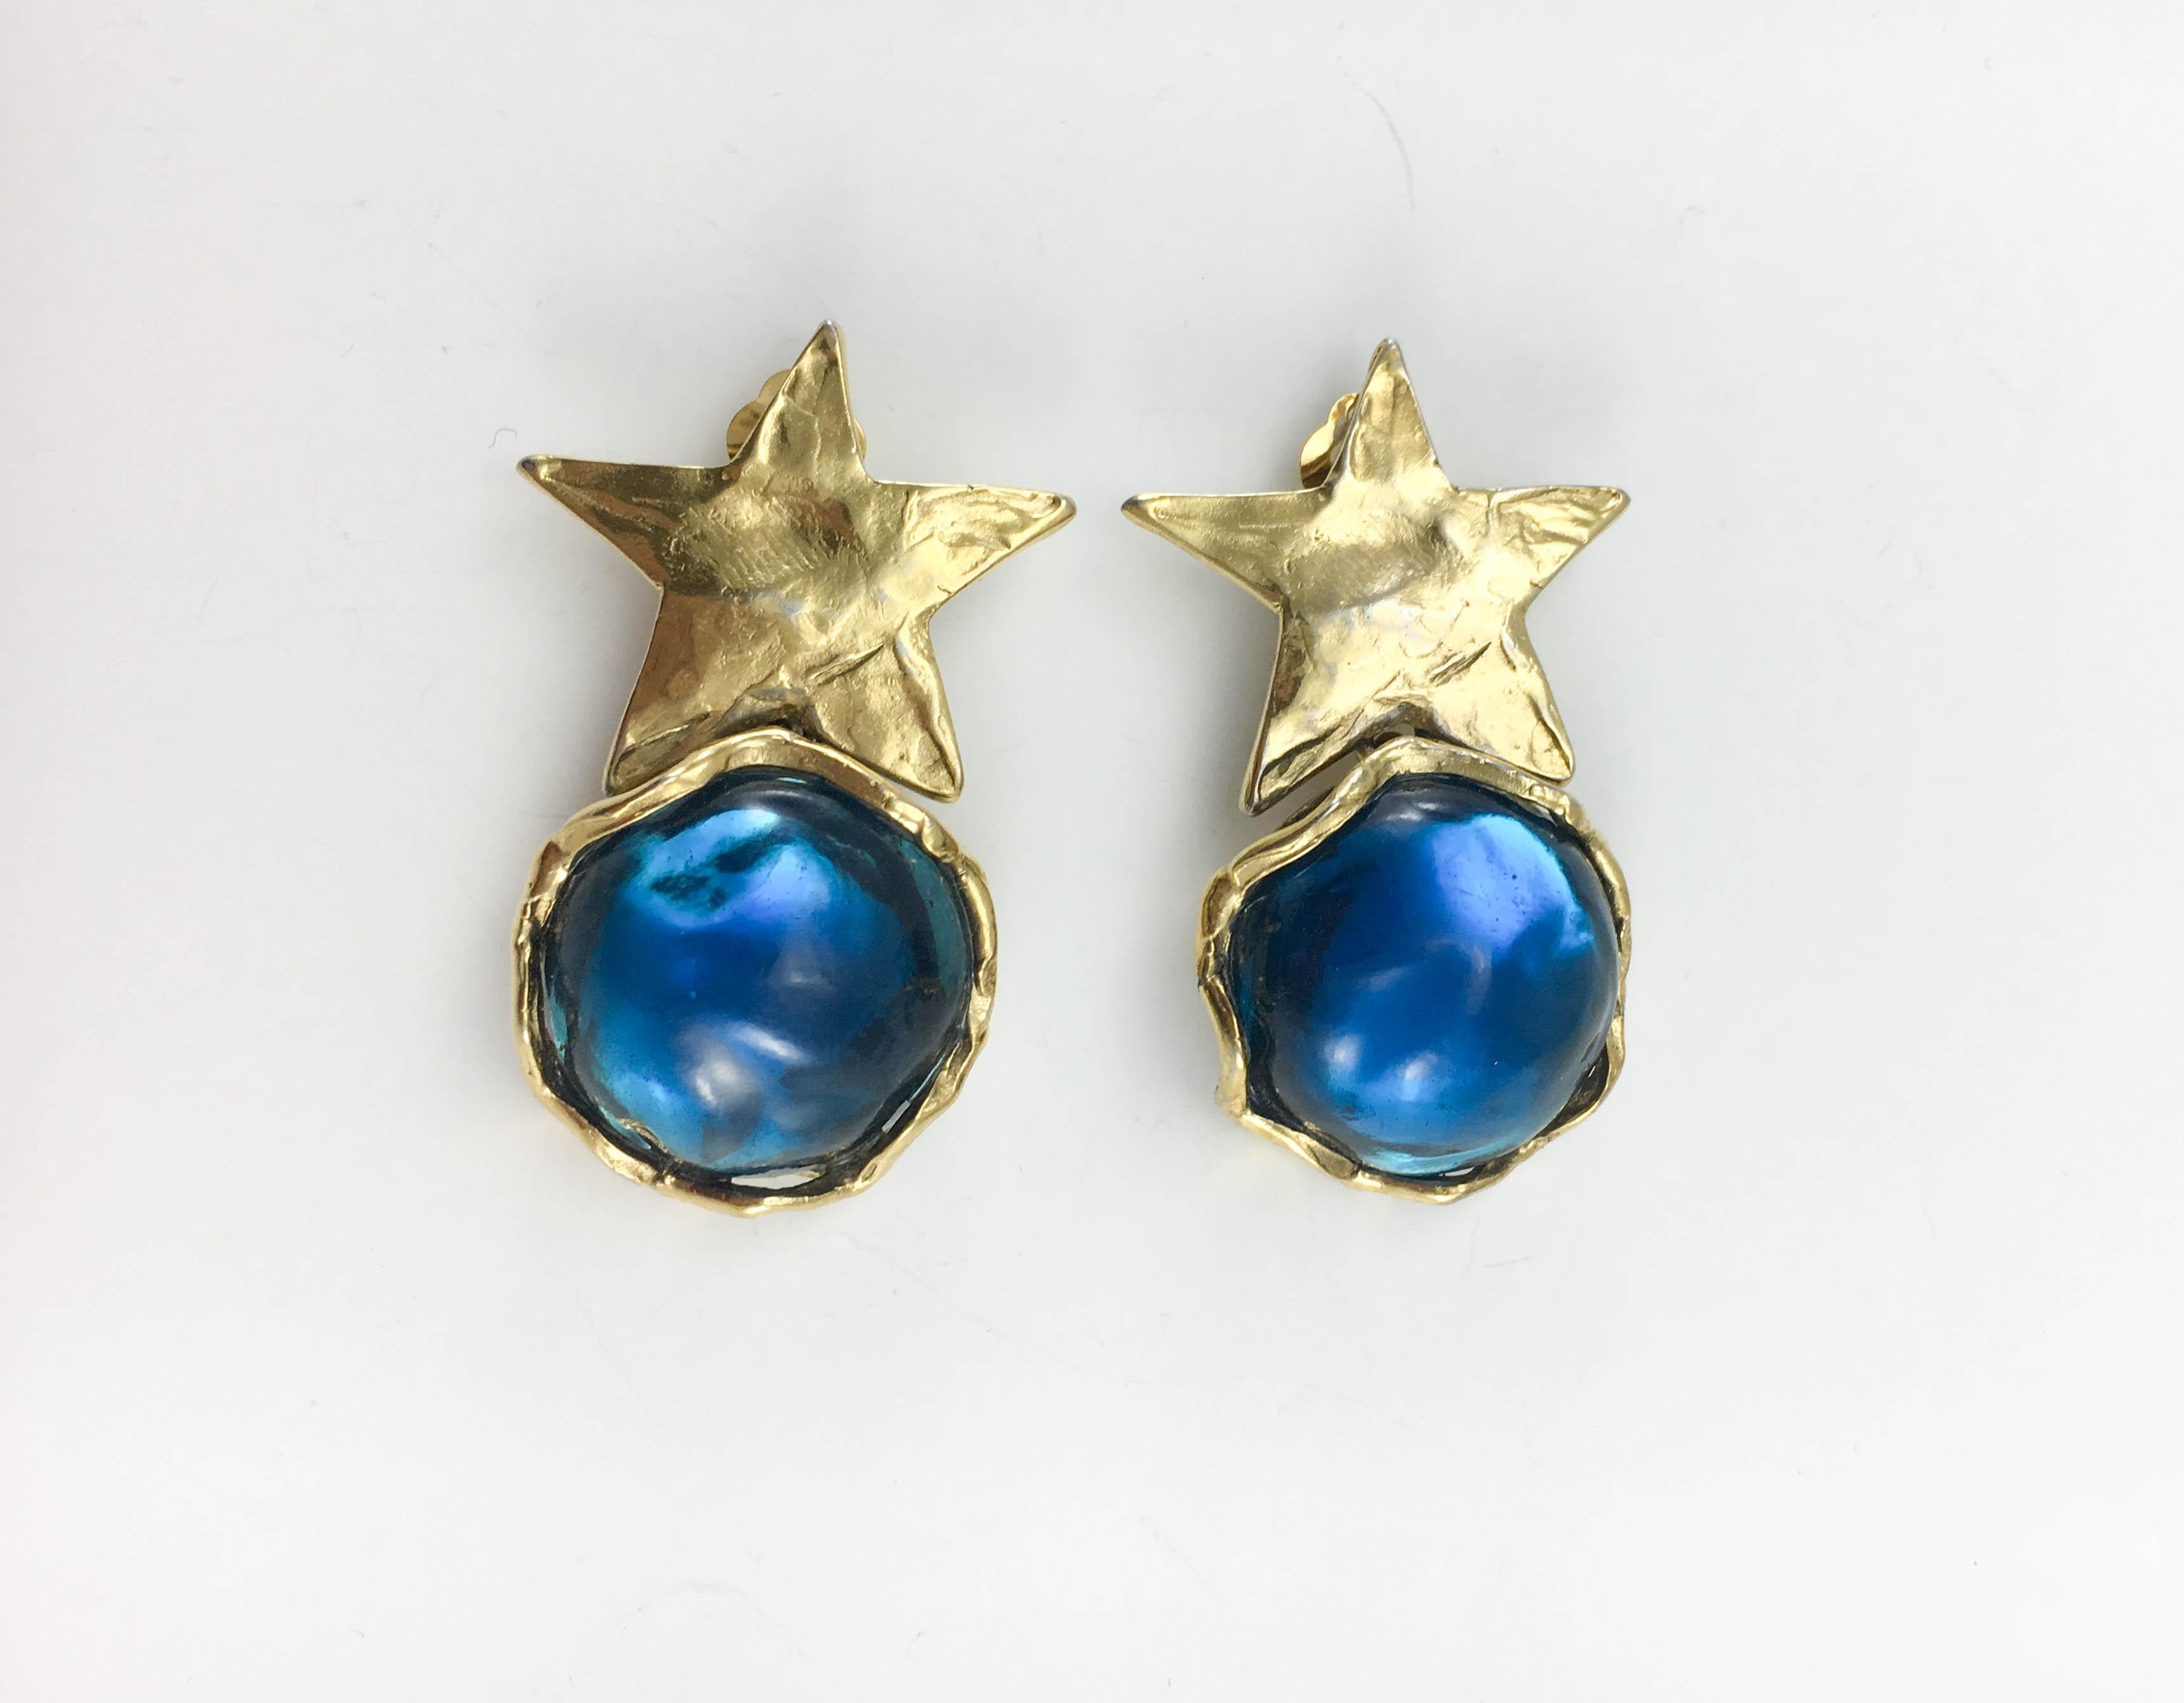 1980's Yves Saint Laurent Blue Resin and Gold-Plated Star Earrings In Excellent Condition For Sale In London, Chelsea